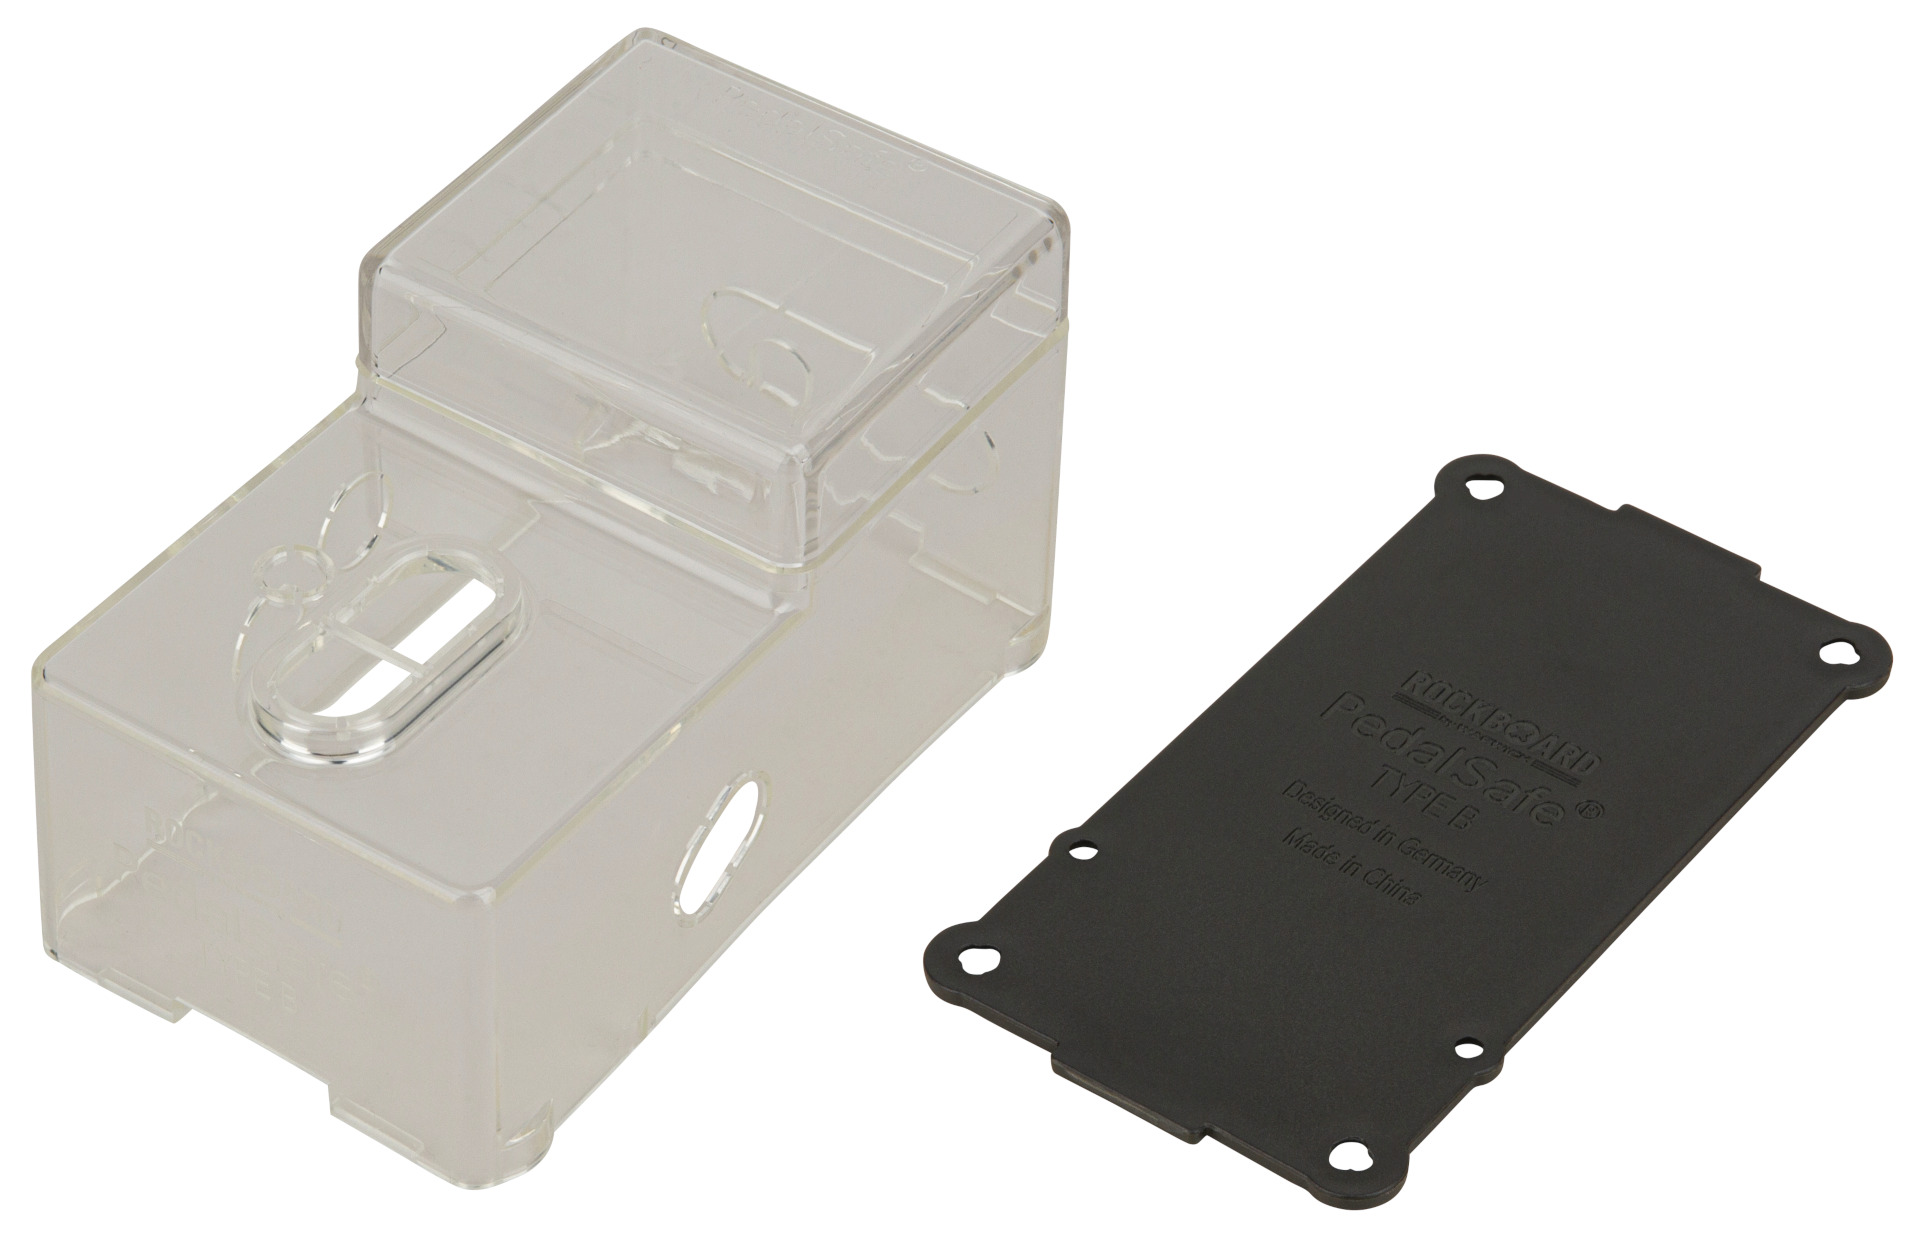 RockBoard PedalSafe Type B - Protective Cover And Universal Mounting Plate For Standard Single Pedals